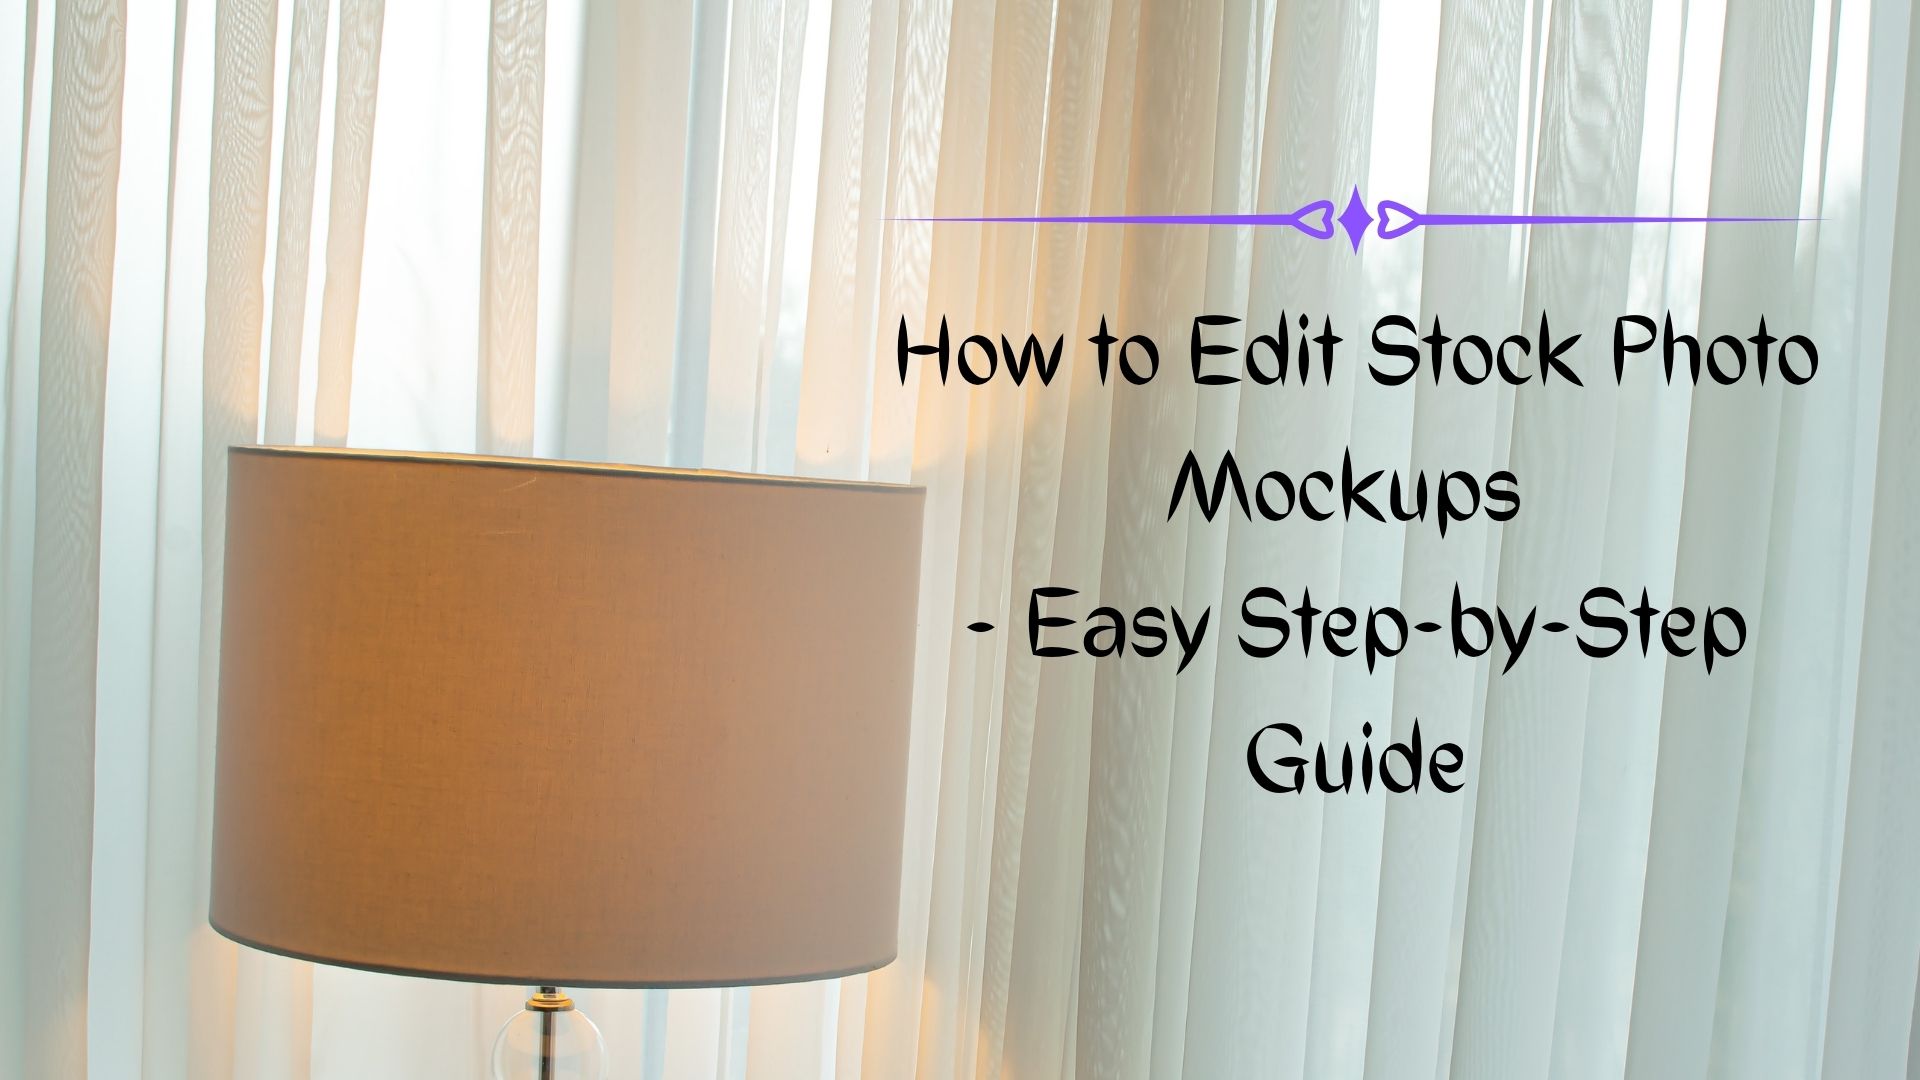 How to Edit Photo Mockups? – 101 Guide for Beginners